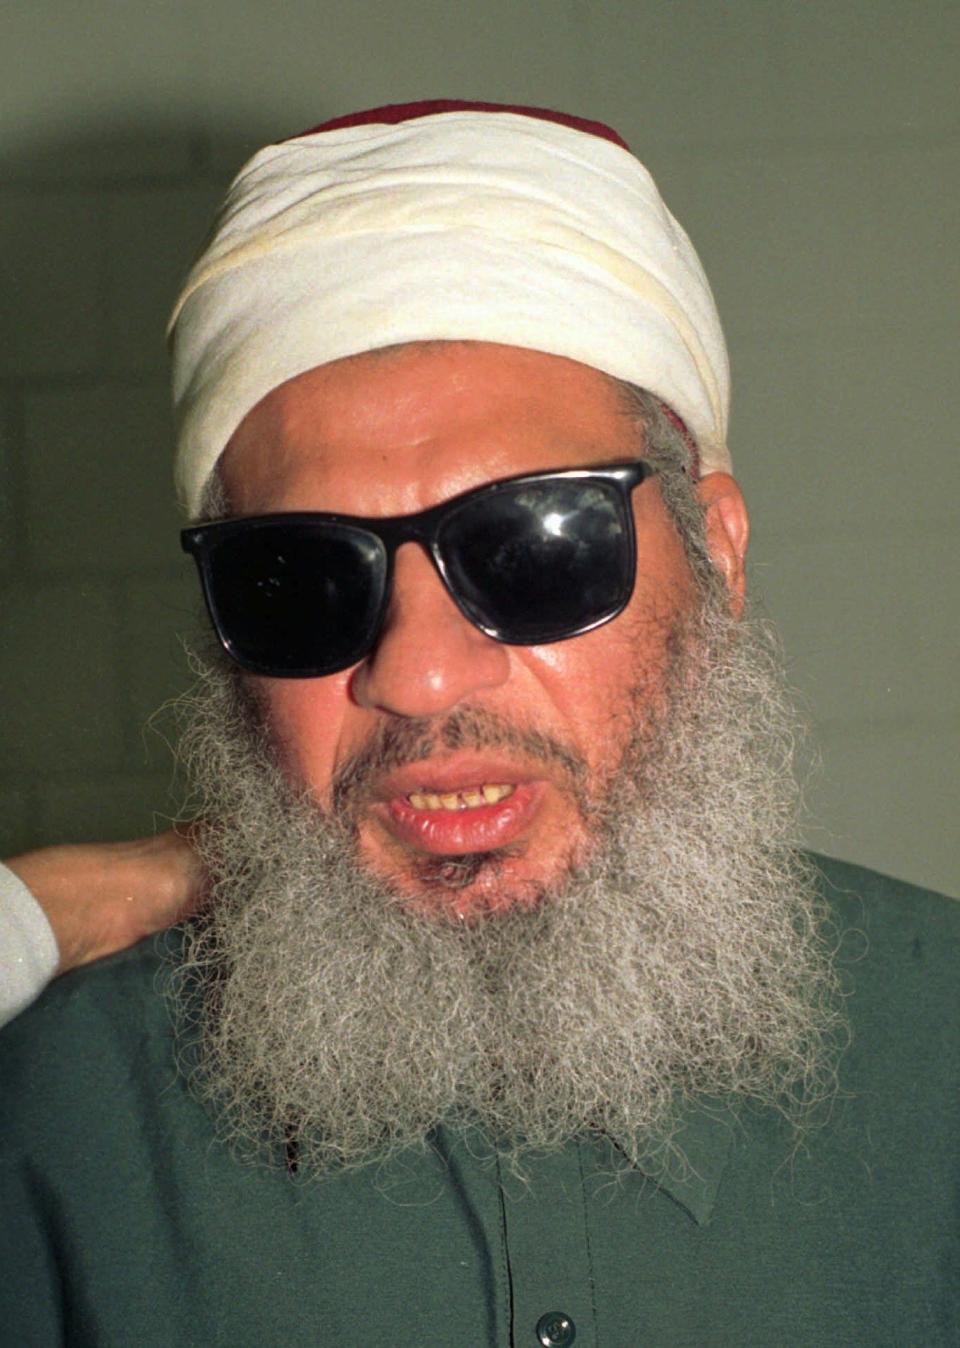 Egyptian-born Islamic cleric Omar Abdel Rahman was convicted in a seditious conspiracy case and sentenced in to life in prison in 1995 for conspiring to blow up landmarks in New York, including the World Trade Center. He died in federal prison.